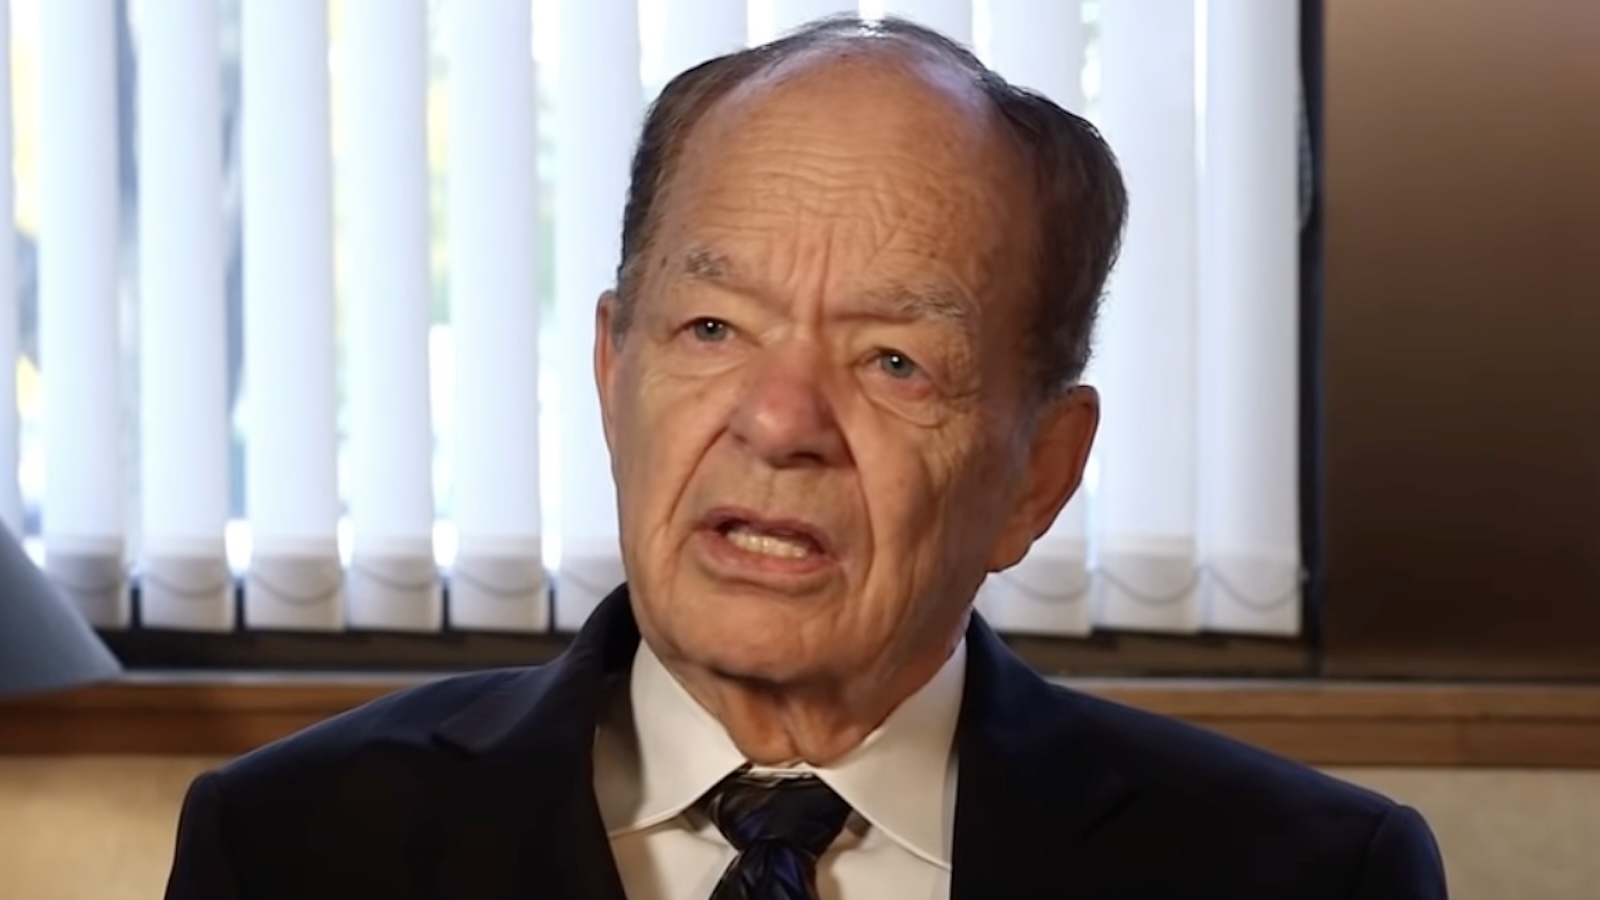 Report reveals reason Glen Taylor backed out of Timberwolves sale